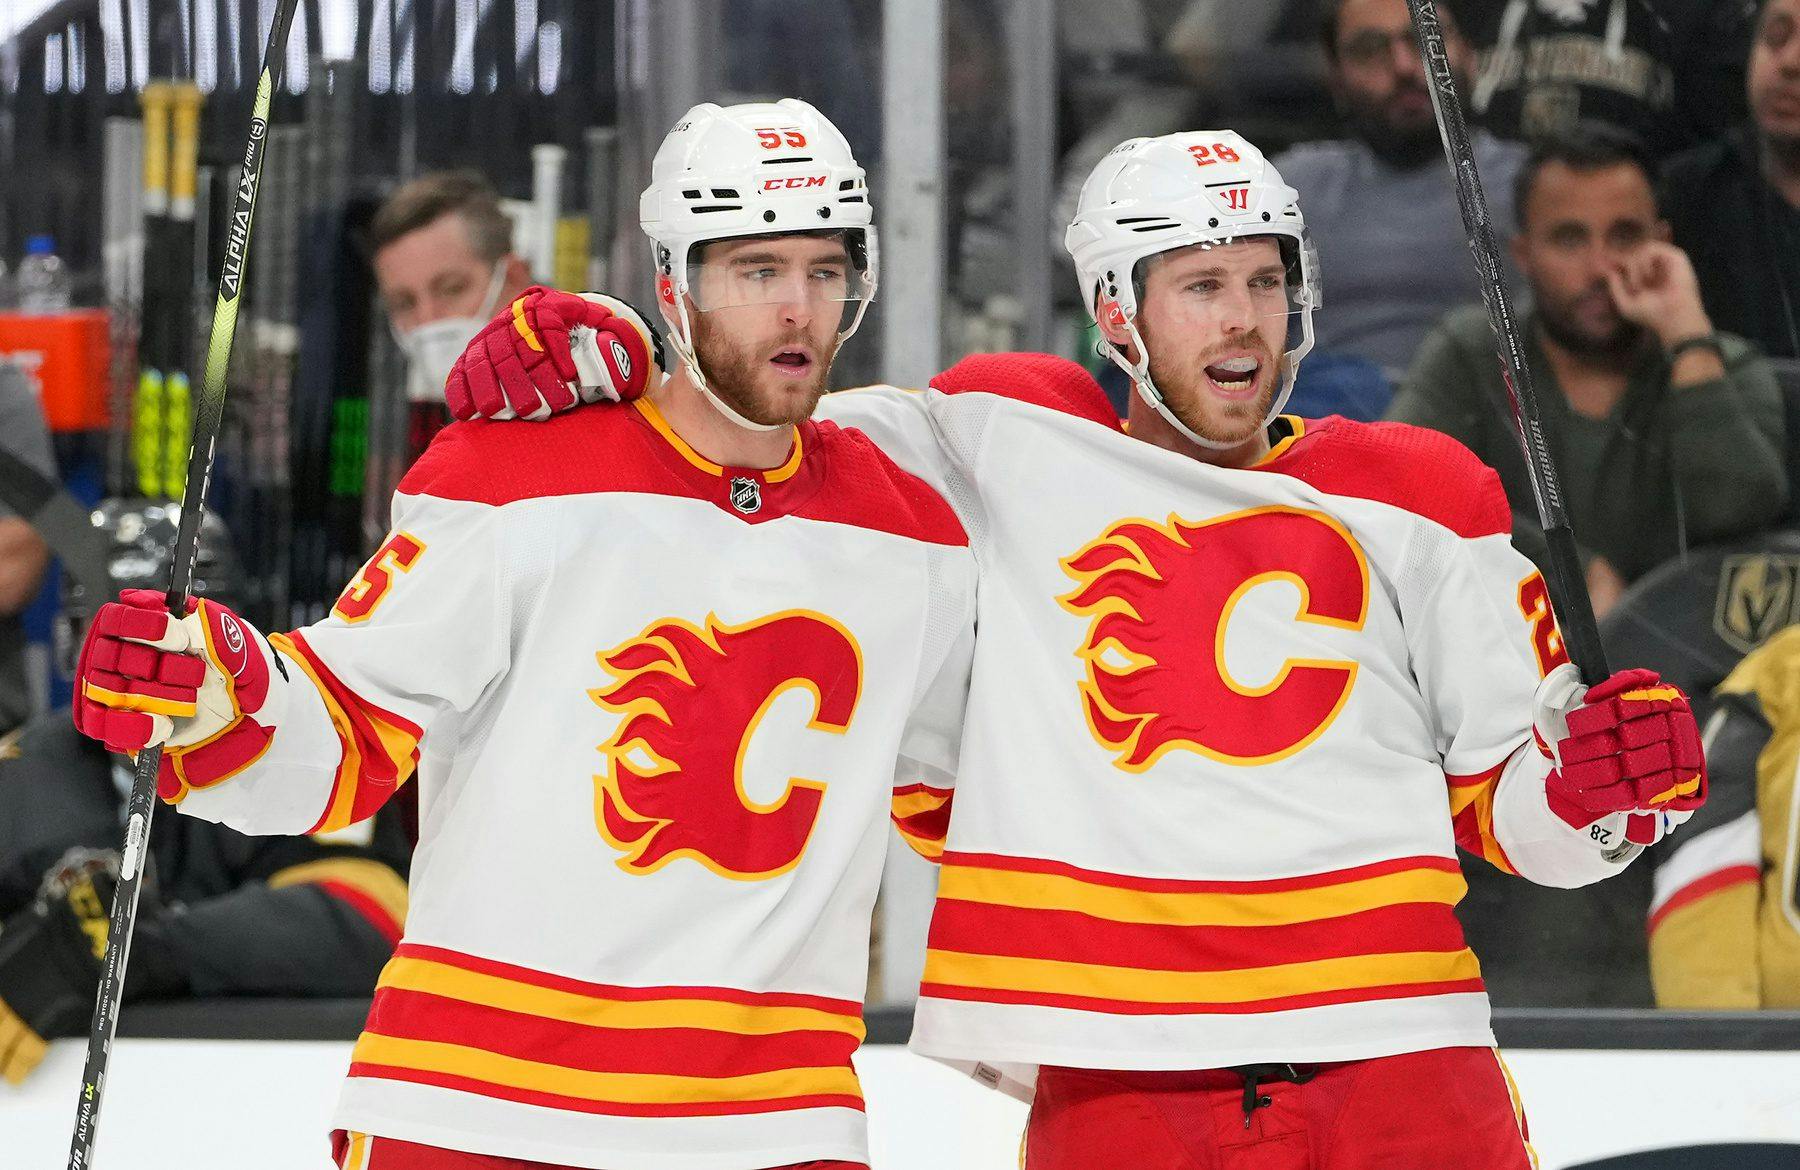 Calgary Flames’ Lindholm, Hanifin and Backlund all potentially not re-signing